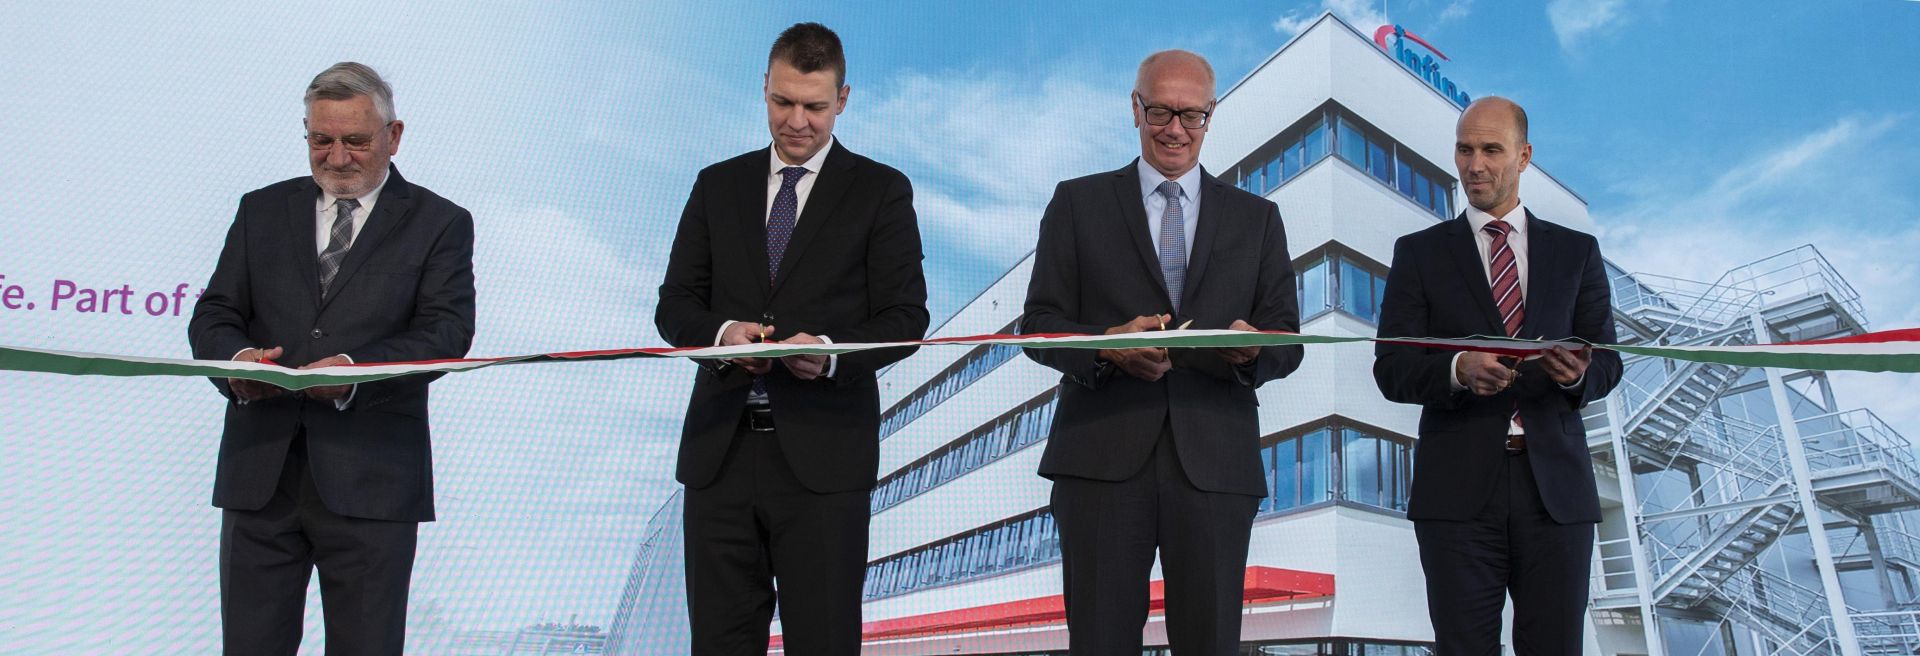 New Infineon Site Inaugurated To Produce High-Power Semiconductor Modules - VIDEO REPORT